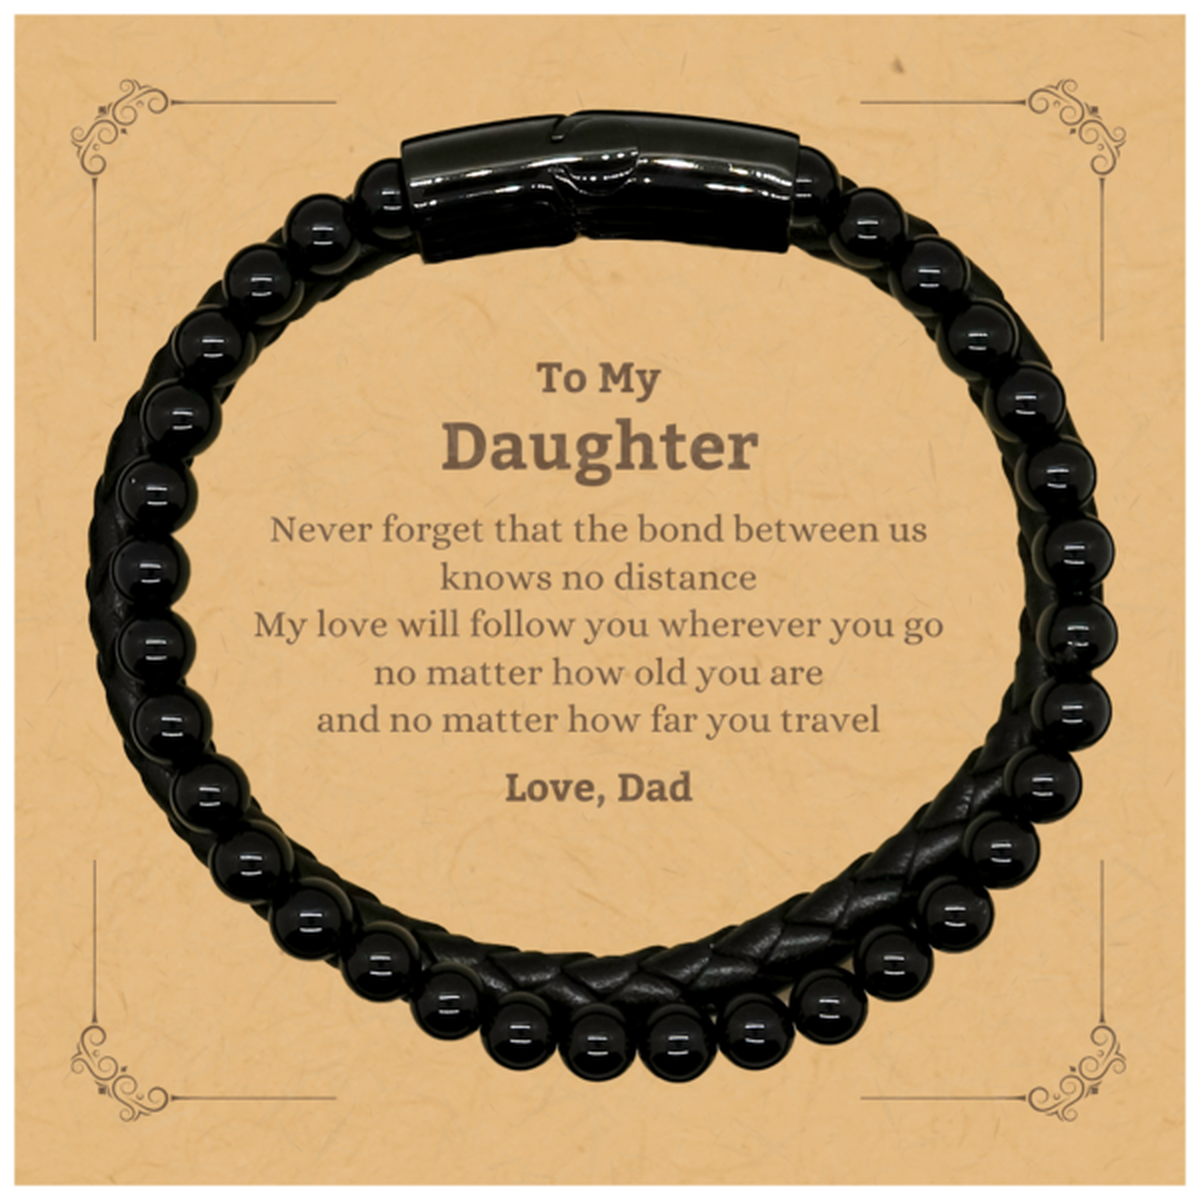 Daughter Birthday Gifts from Dad, Adjustable Stone Leather Bracelets for Daughter Christmas Graduation Unique Gifts Daughter Never forget that the bond between us knows no distance. Love, Dad